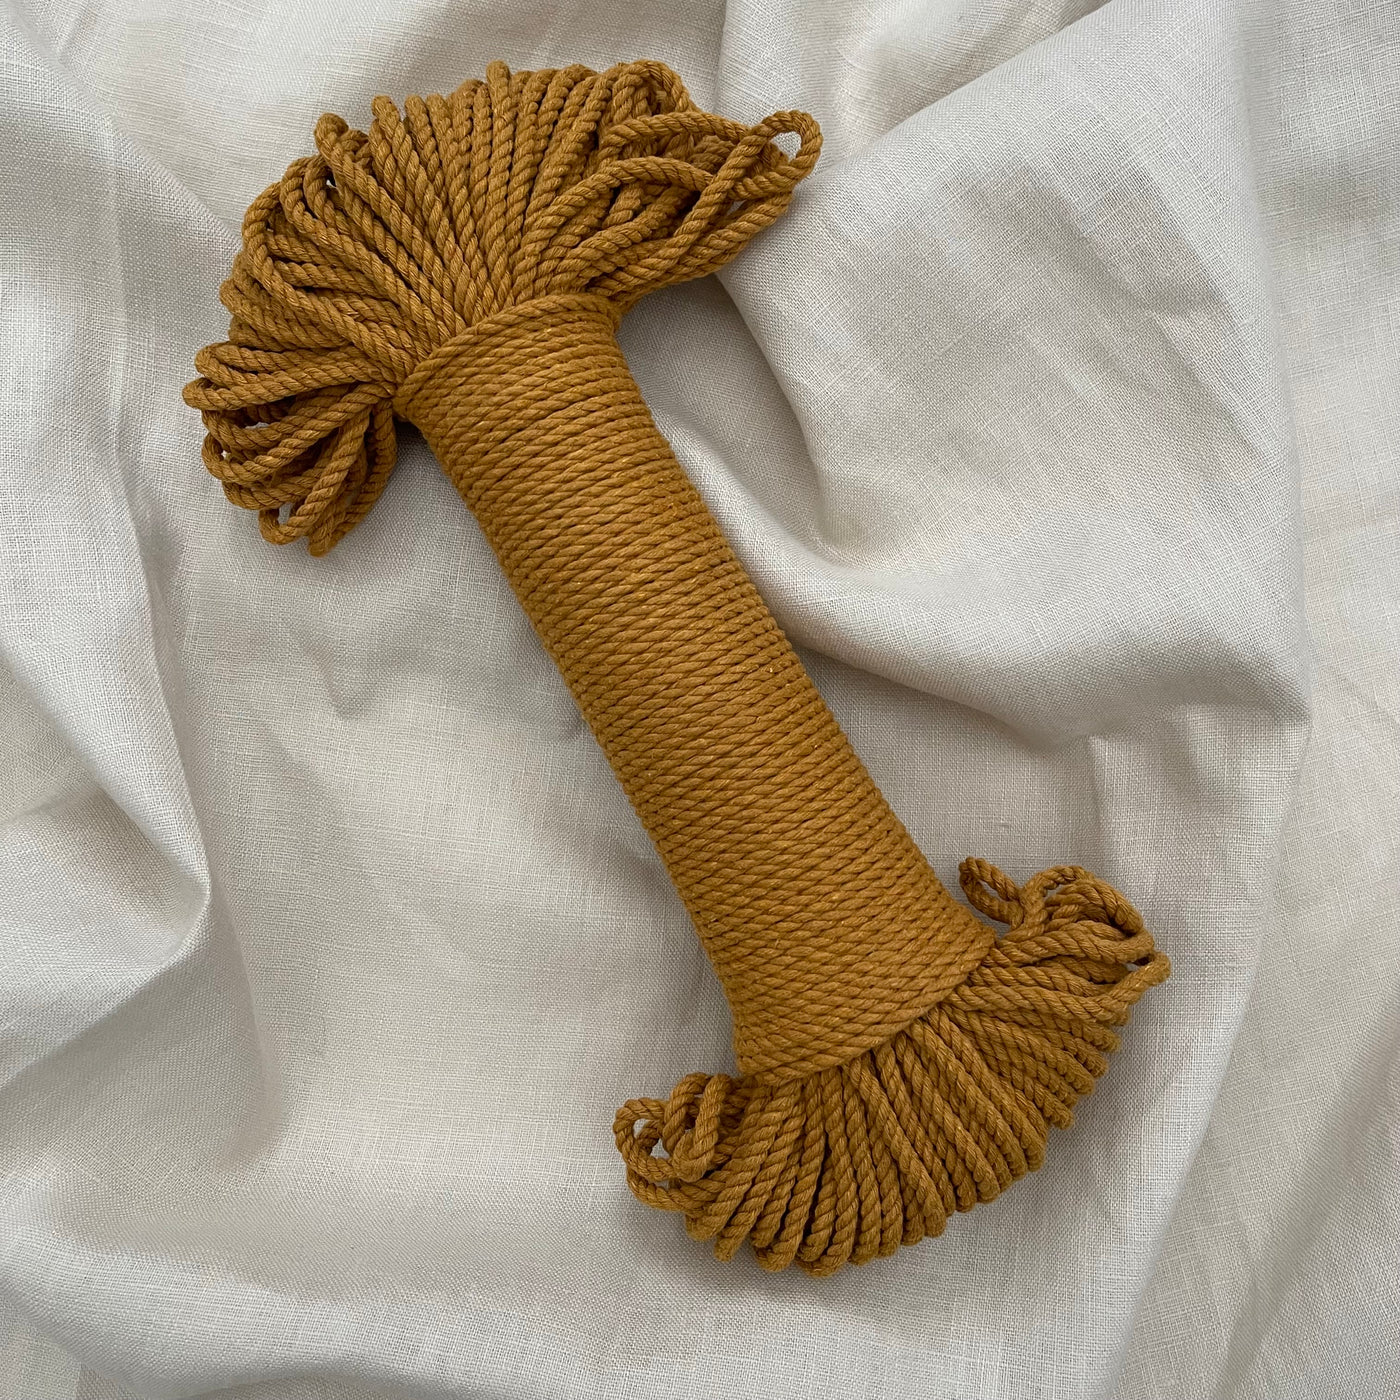 Macrame 3ply cotton rope 4mm in a classical 'Mustard' colour is a fantastic addition to your fibre collection and is perfect for macrame projects such as plant hangers or pieces that require that little bit of extra guts!